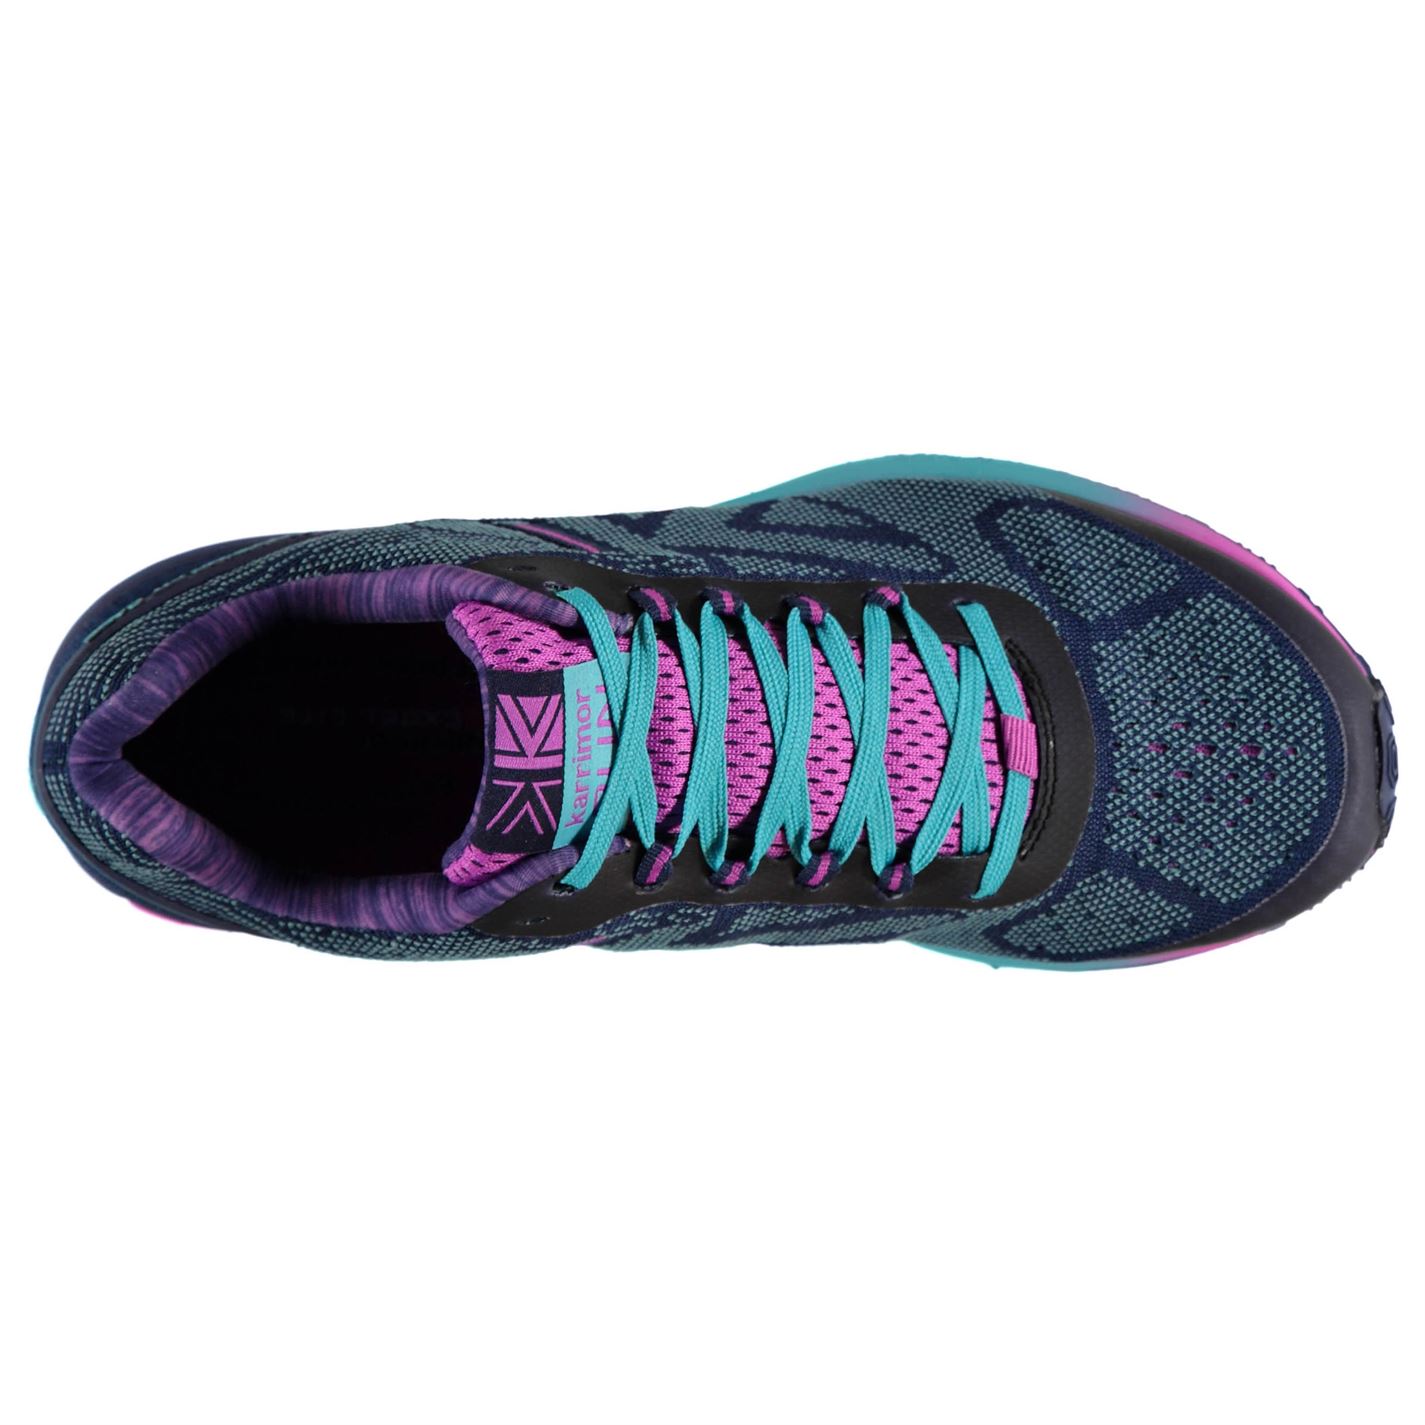 Karrimor Womens D30 Excel 2 Ladies Running Shoes Sports Lace Up ...